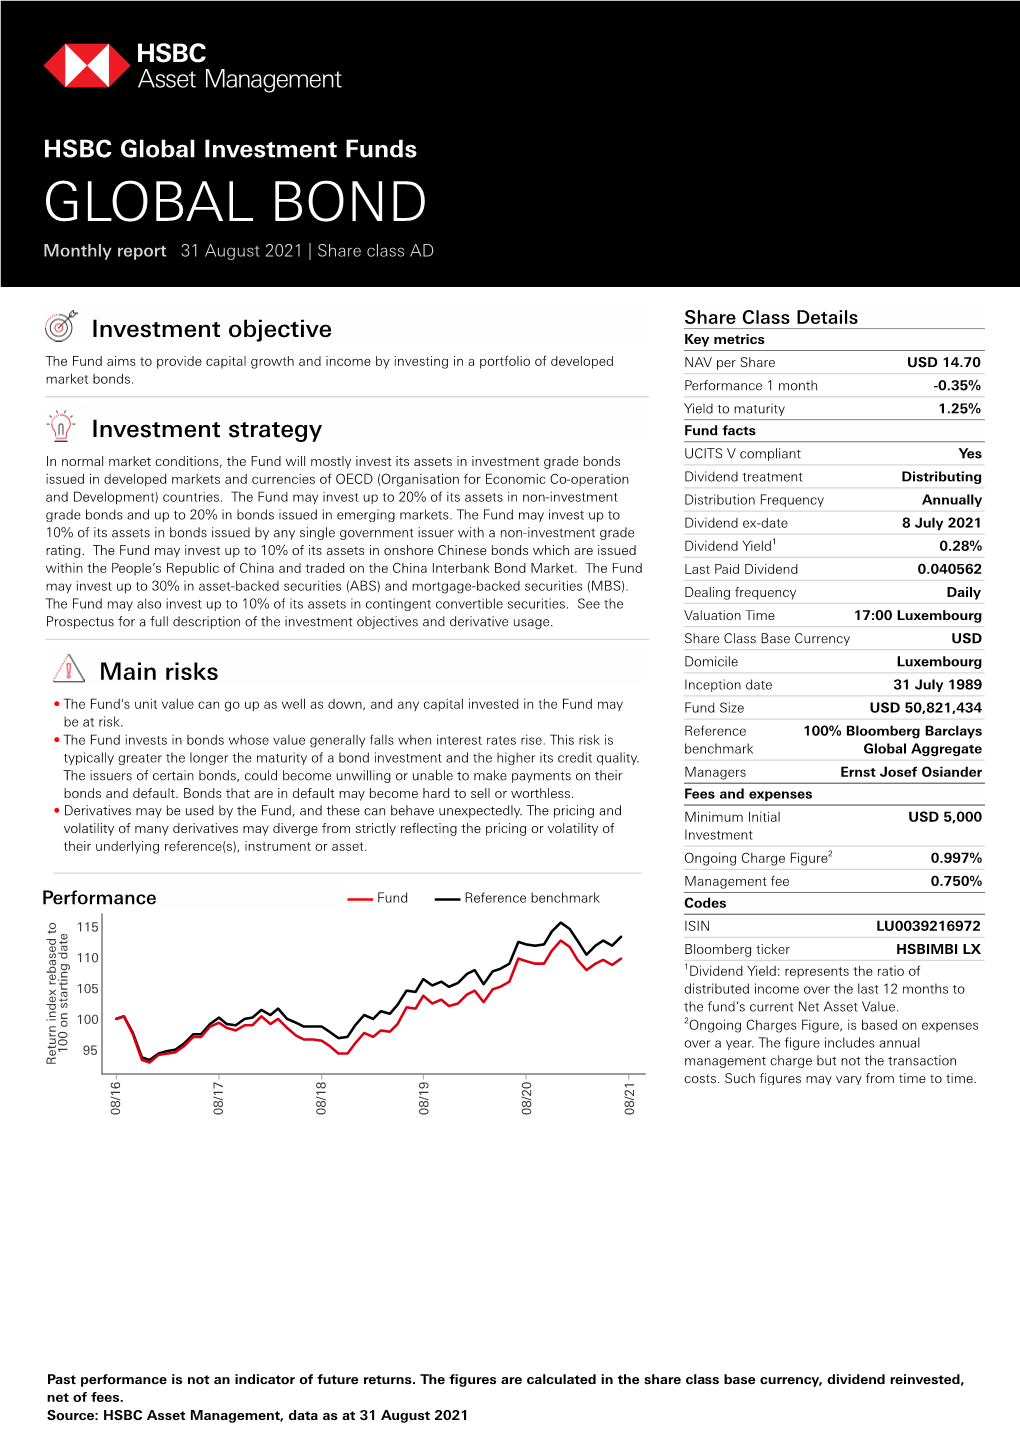 HSBC Global Investment Funds GLOBAL BOND Monthly Report 31 August 2021 | Share Class AD